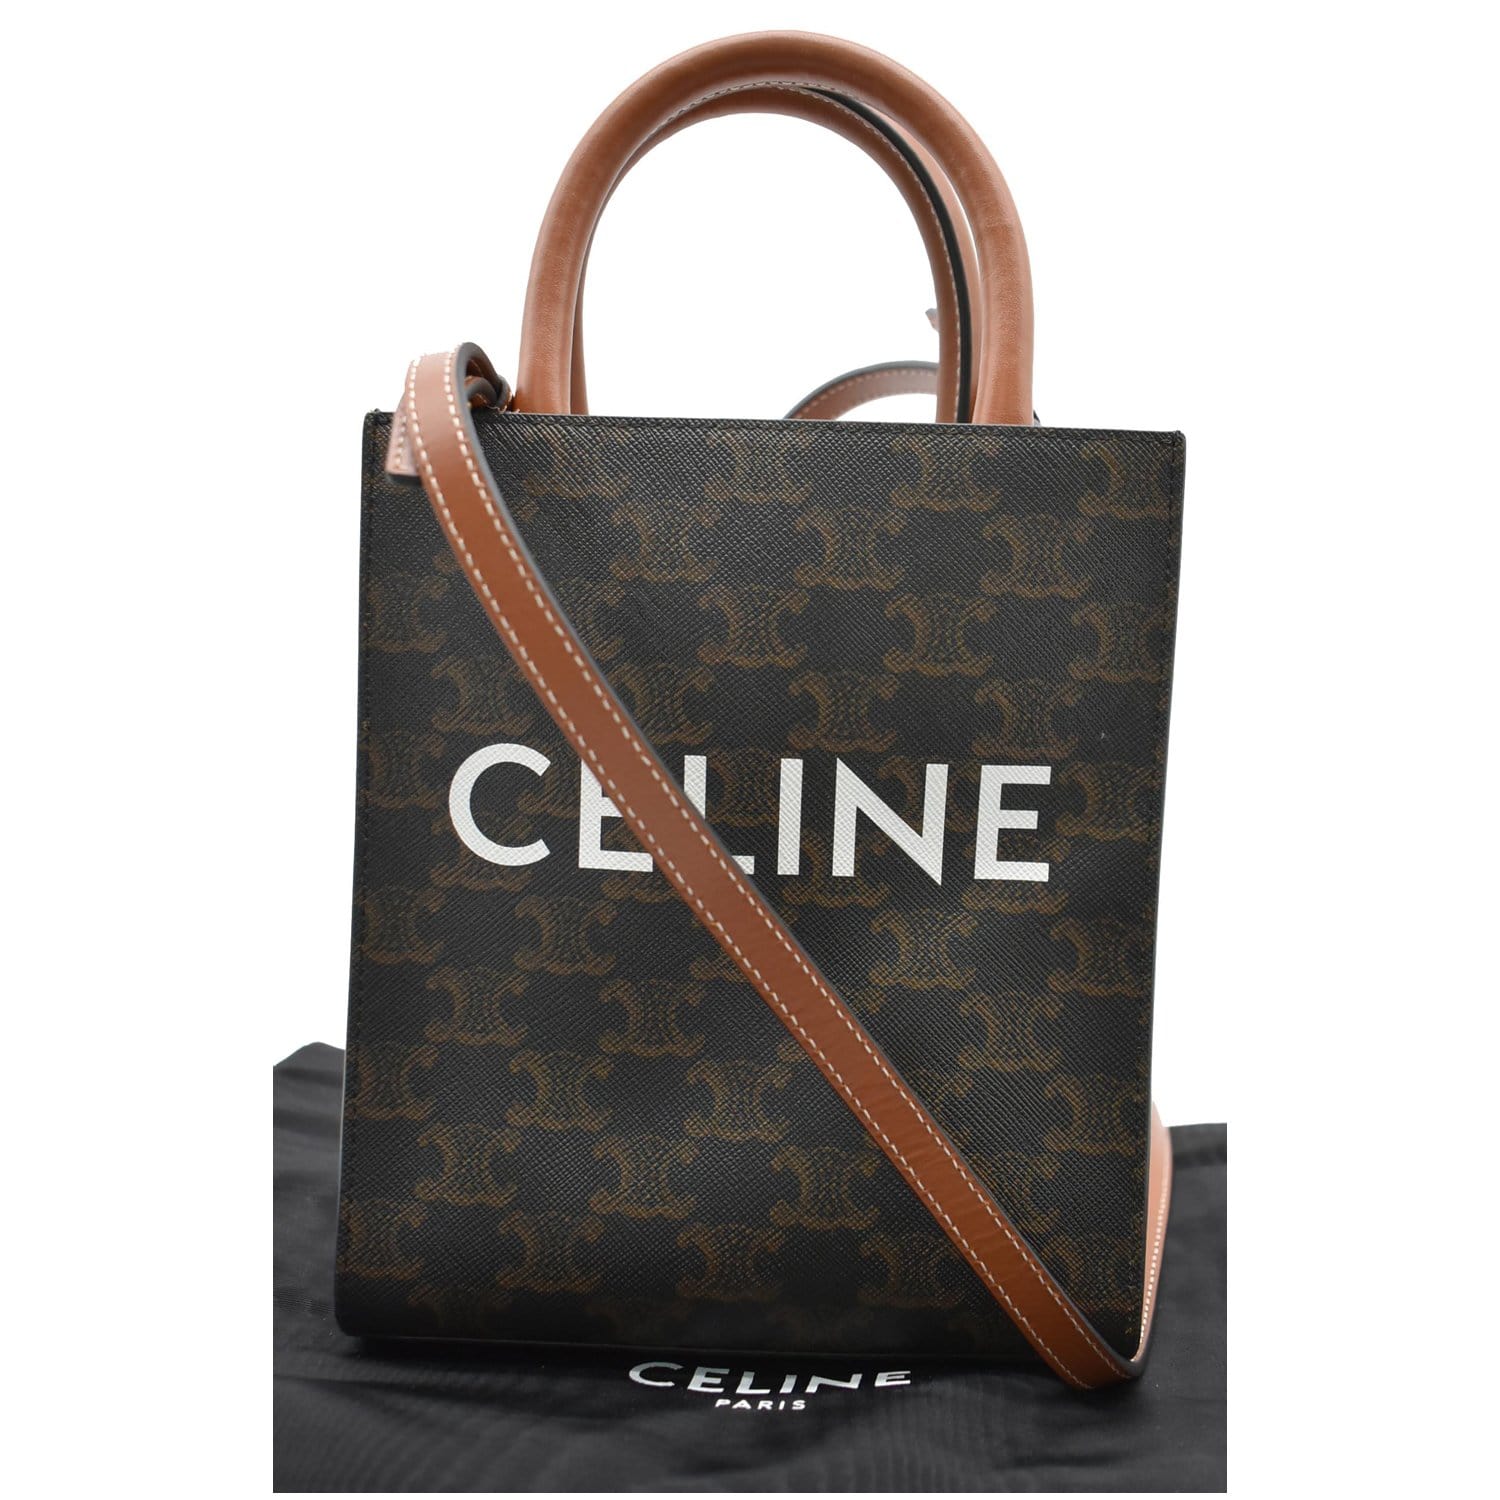 Where to buy the Celine Triomphe